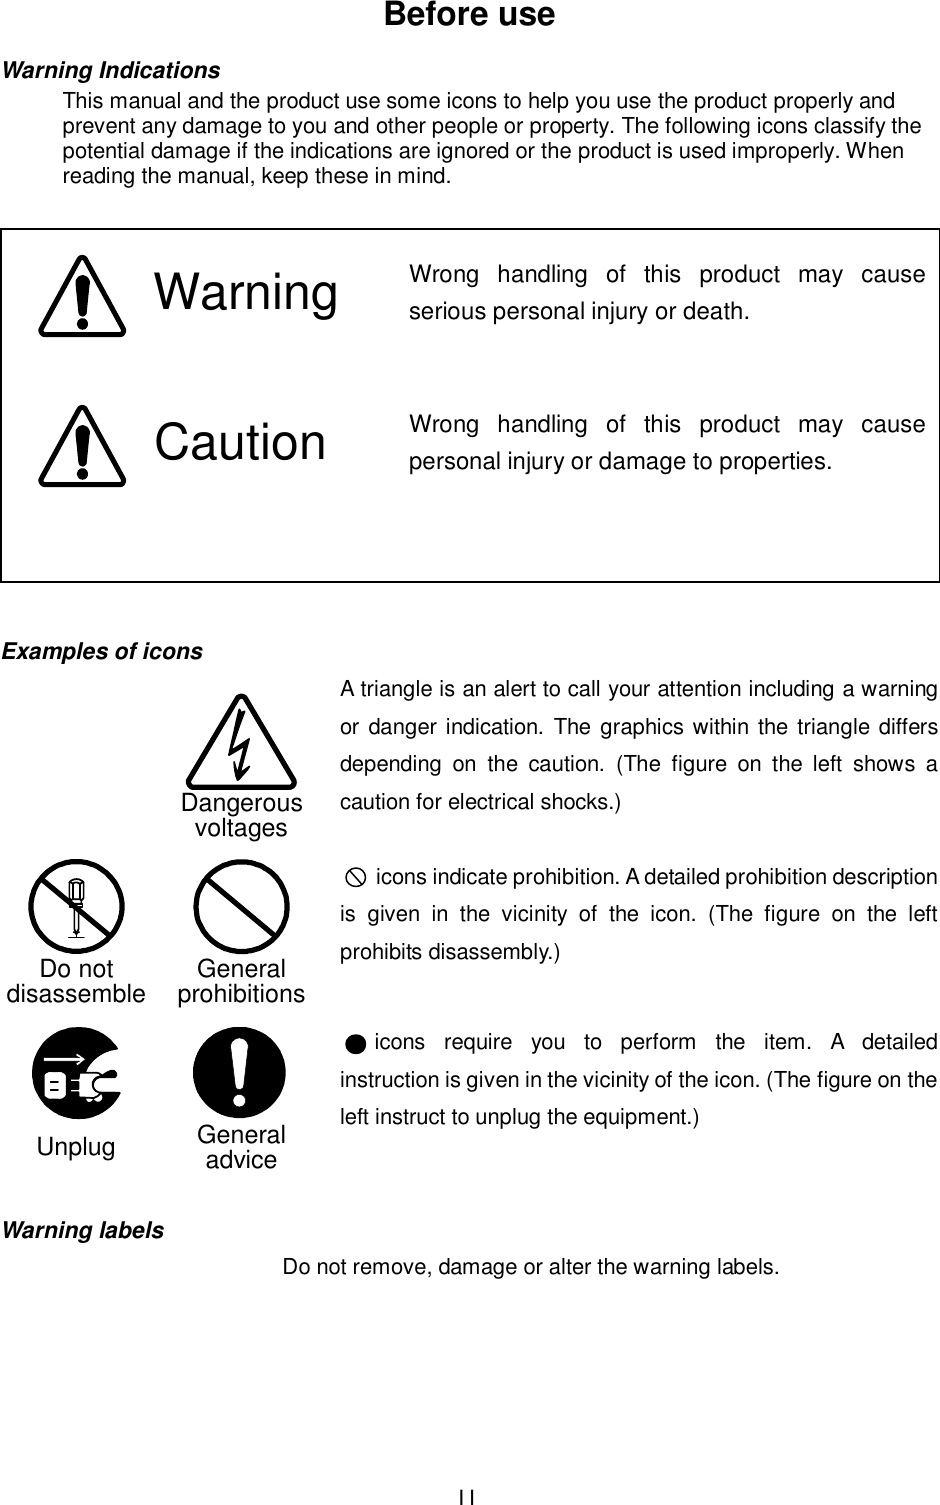  II Before use Warning Indications This manual and the product use some icons to help you use the product properly and prevent any damage to you and other people or property. The following icons classify the potential damage if the indications are ignored or the product is used improperly. When reading the manual, keep these in mind.     Examples of icons A triangle is an alert to call your attention including a warning or danger indication.  The graphics within the triangle differs depending  on  the  caution.  (The  figure  on  the  left  shows  a caution for electrical shocks.)      icons indicate prohibition. A detailed prohibition description is  given  in  the  vicinity  of  the  icon.  (The  figure  on  the  left prohibits disassembly.)           icons  require  you  to  perform  the  item.  A  detailed instruction is given in the vicinity of the icon. (The figure on the left instruct to unplug the equipment.)   Warning labels Do not remove, damage or alter the warning labels.    Warning      Caution  Wrong  handling  of  this  product  may  cause serious personal injury or death.   Wrong  handling  of  this  product  may  cause personal injury or damage to properties.  DangerousvoltagesGeneralprohibitionsGeneraladviceDo notdisassembleUnplug